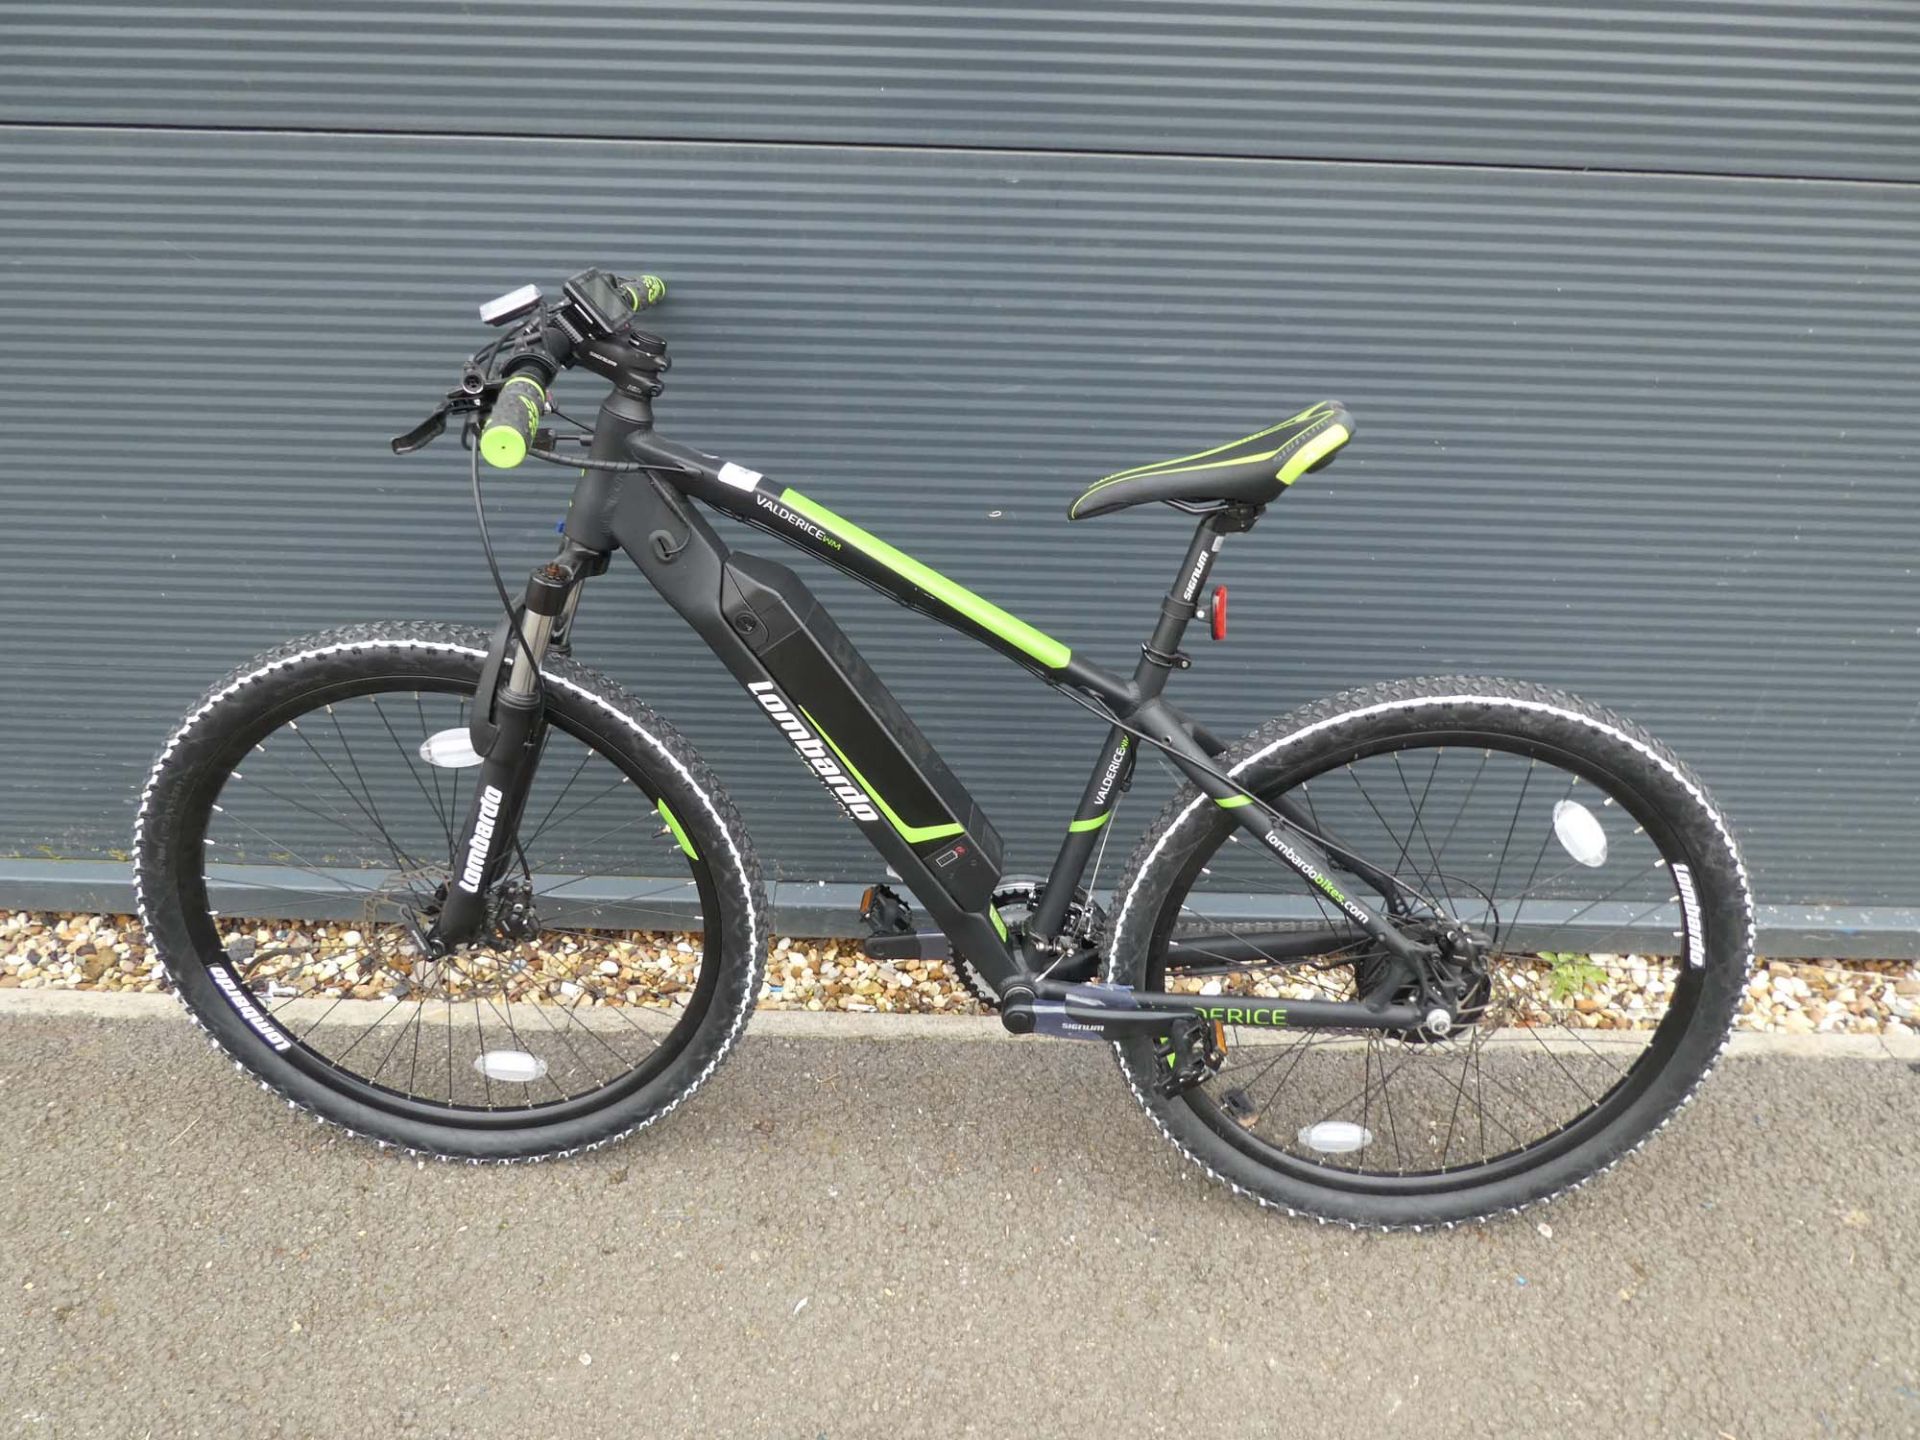 Lombardo electric mountain bike in green and black, no power supply